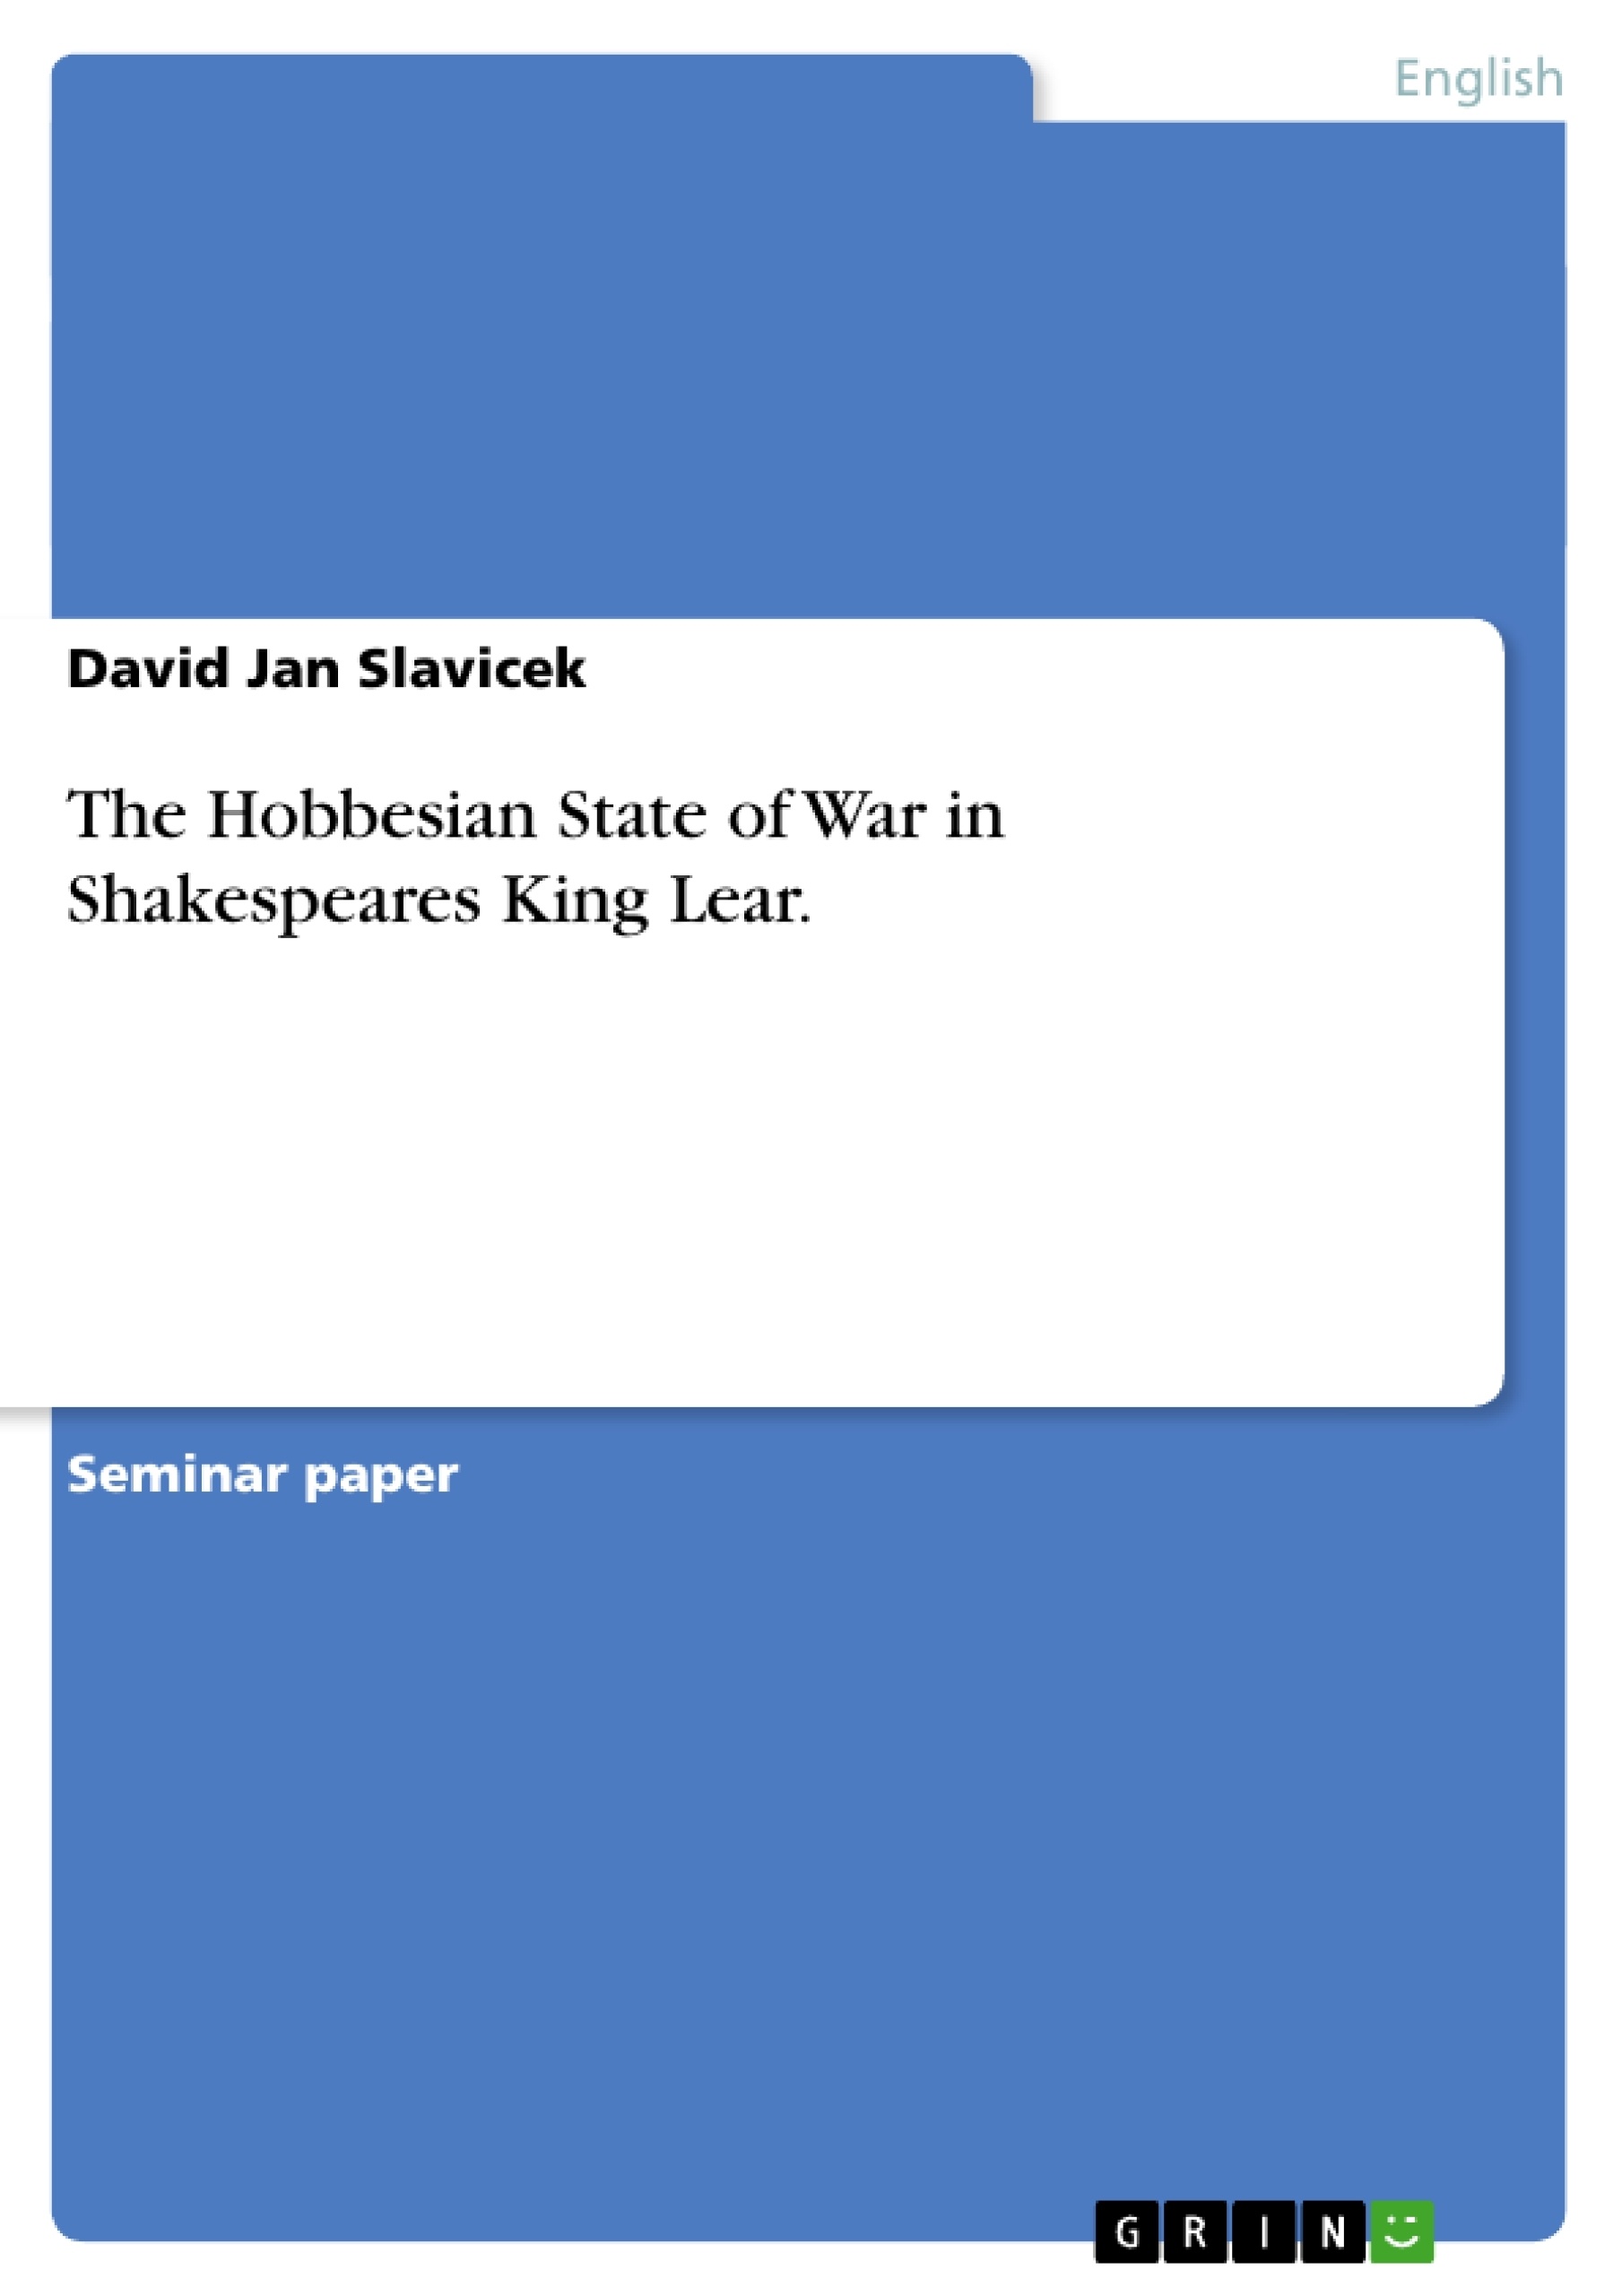 Título: The Hobbesian State of War in Shakespeares King Lear.